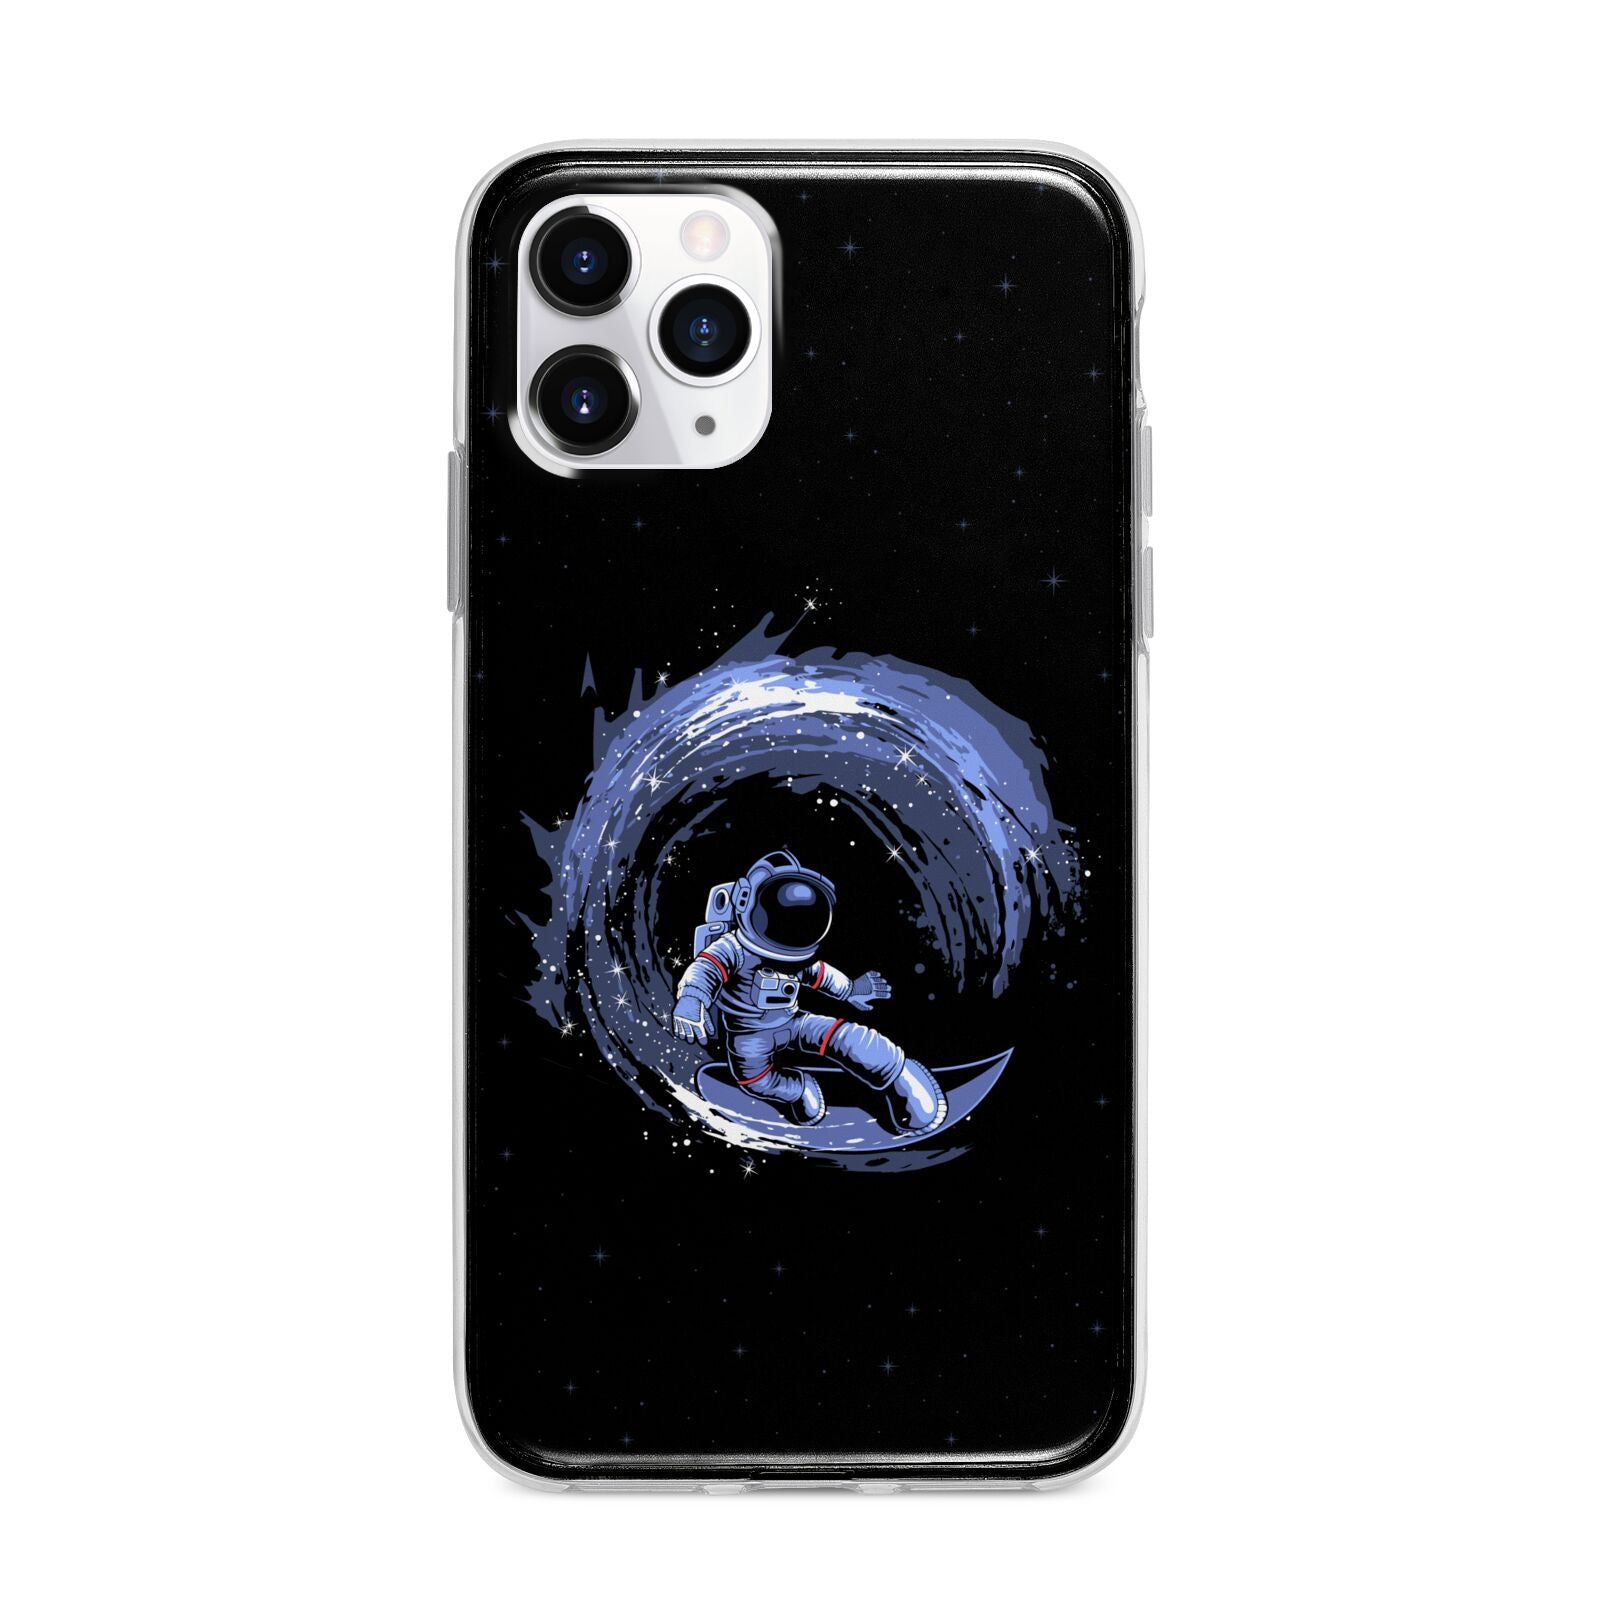 Surfing Astronaut Apple iPhone 11 Pro Max in Silver with Bumper Case